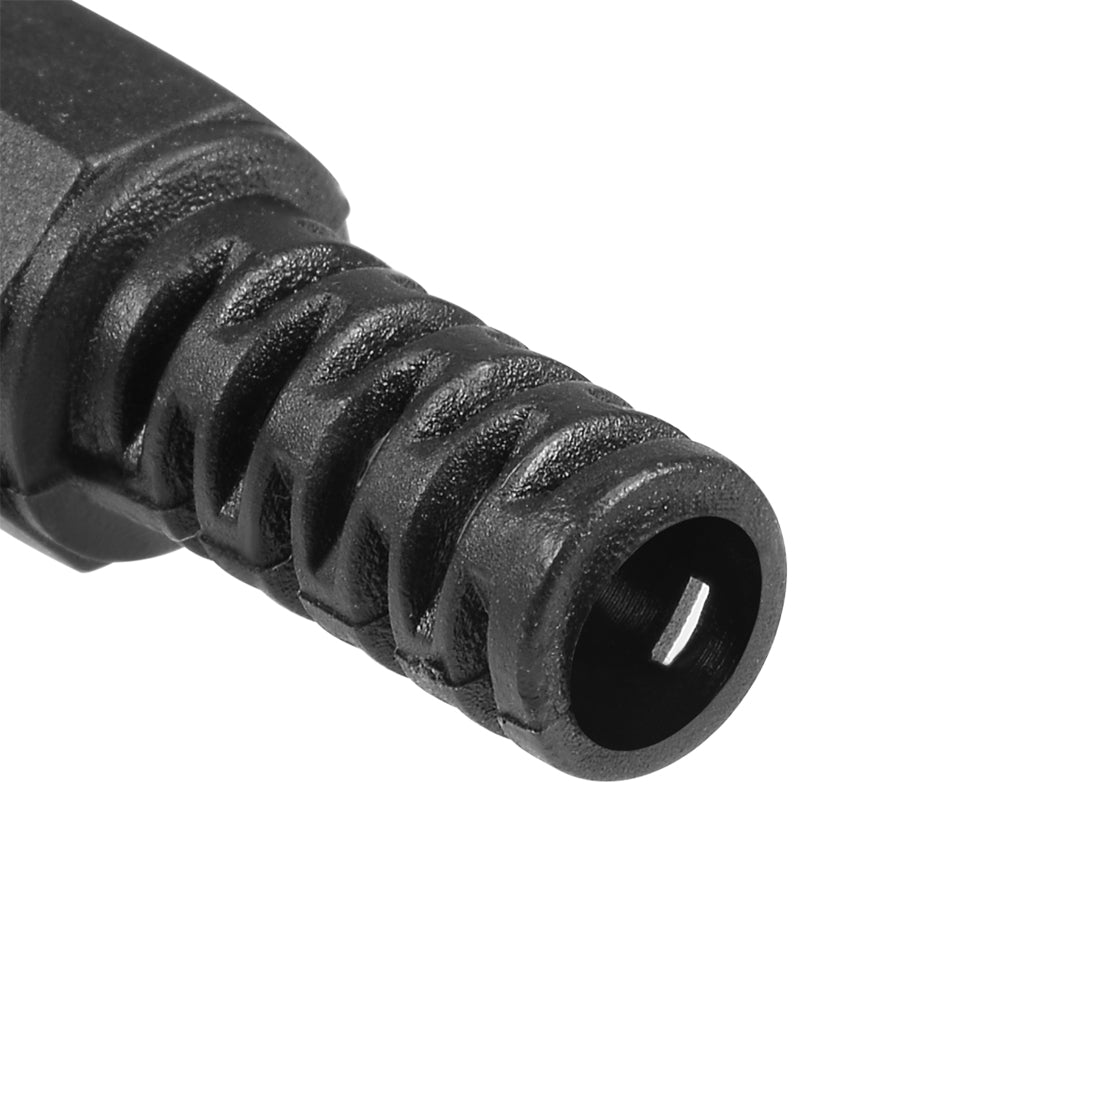 uxcell Uxcell 10Pcs DC Male Connector 3.5mm x 1.1mm Power Cable Jack Adapter Black